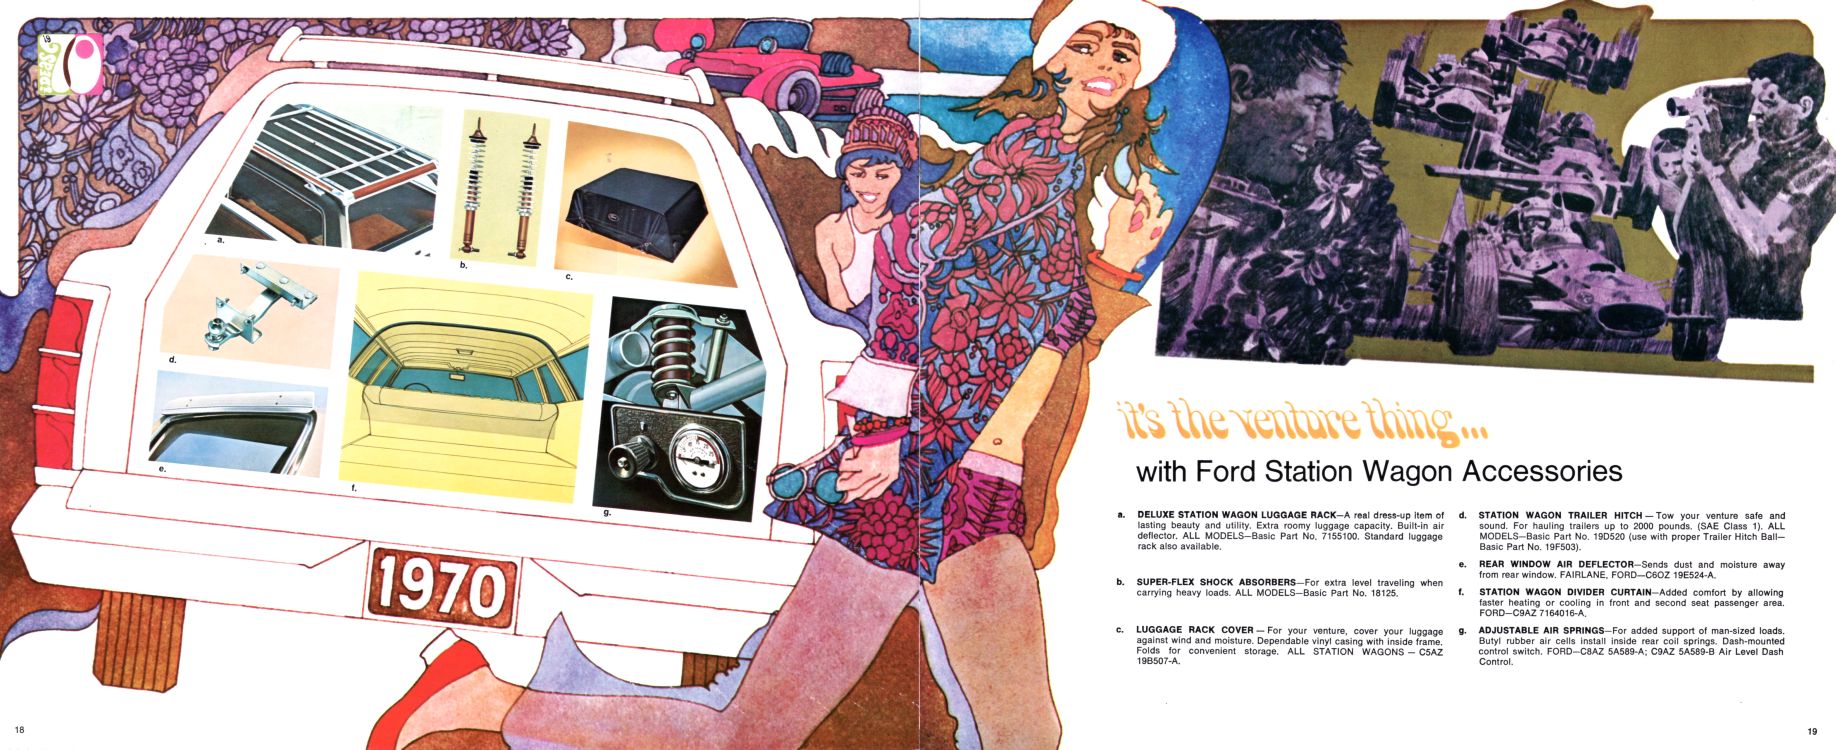 1970_Ford_Accessories-18-19